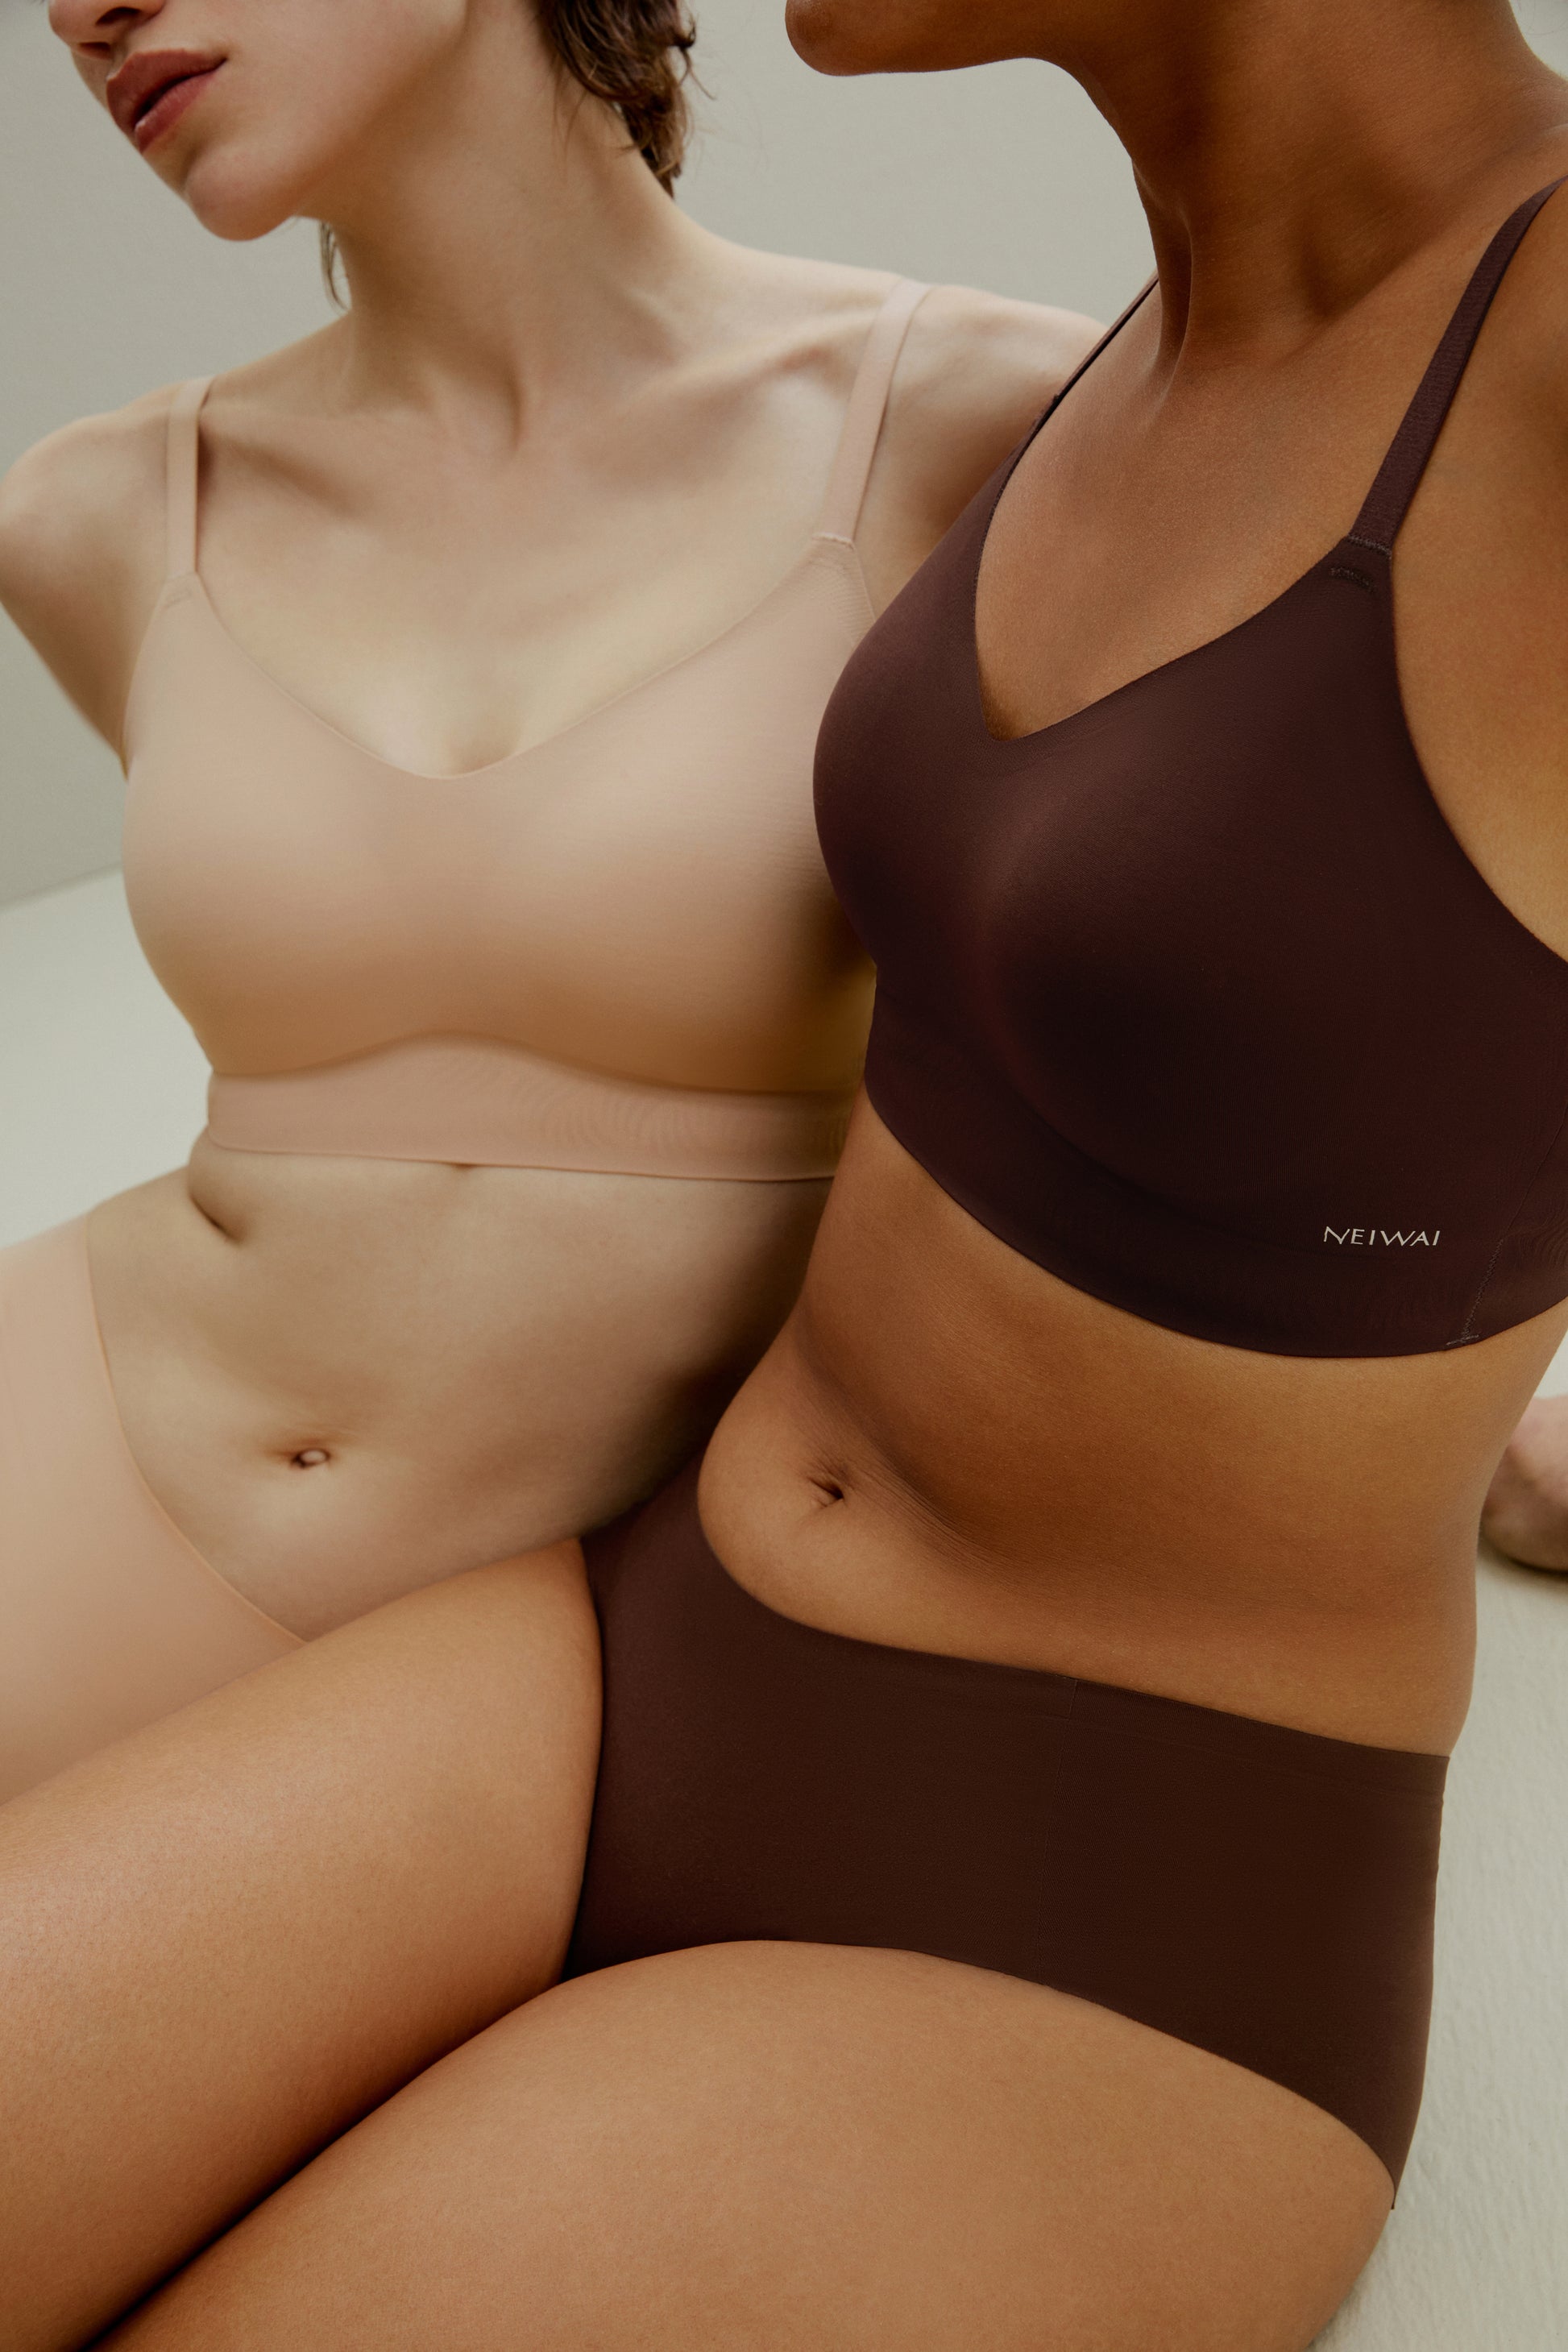 Woman wearing tan-colored bra and brief set and woman wearing brown bra and brief set